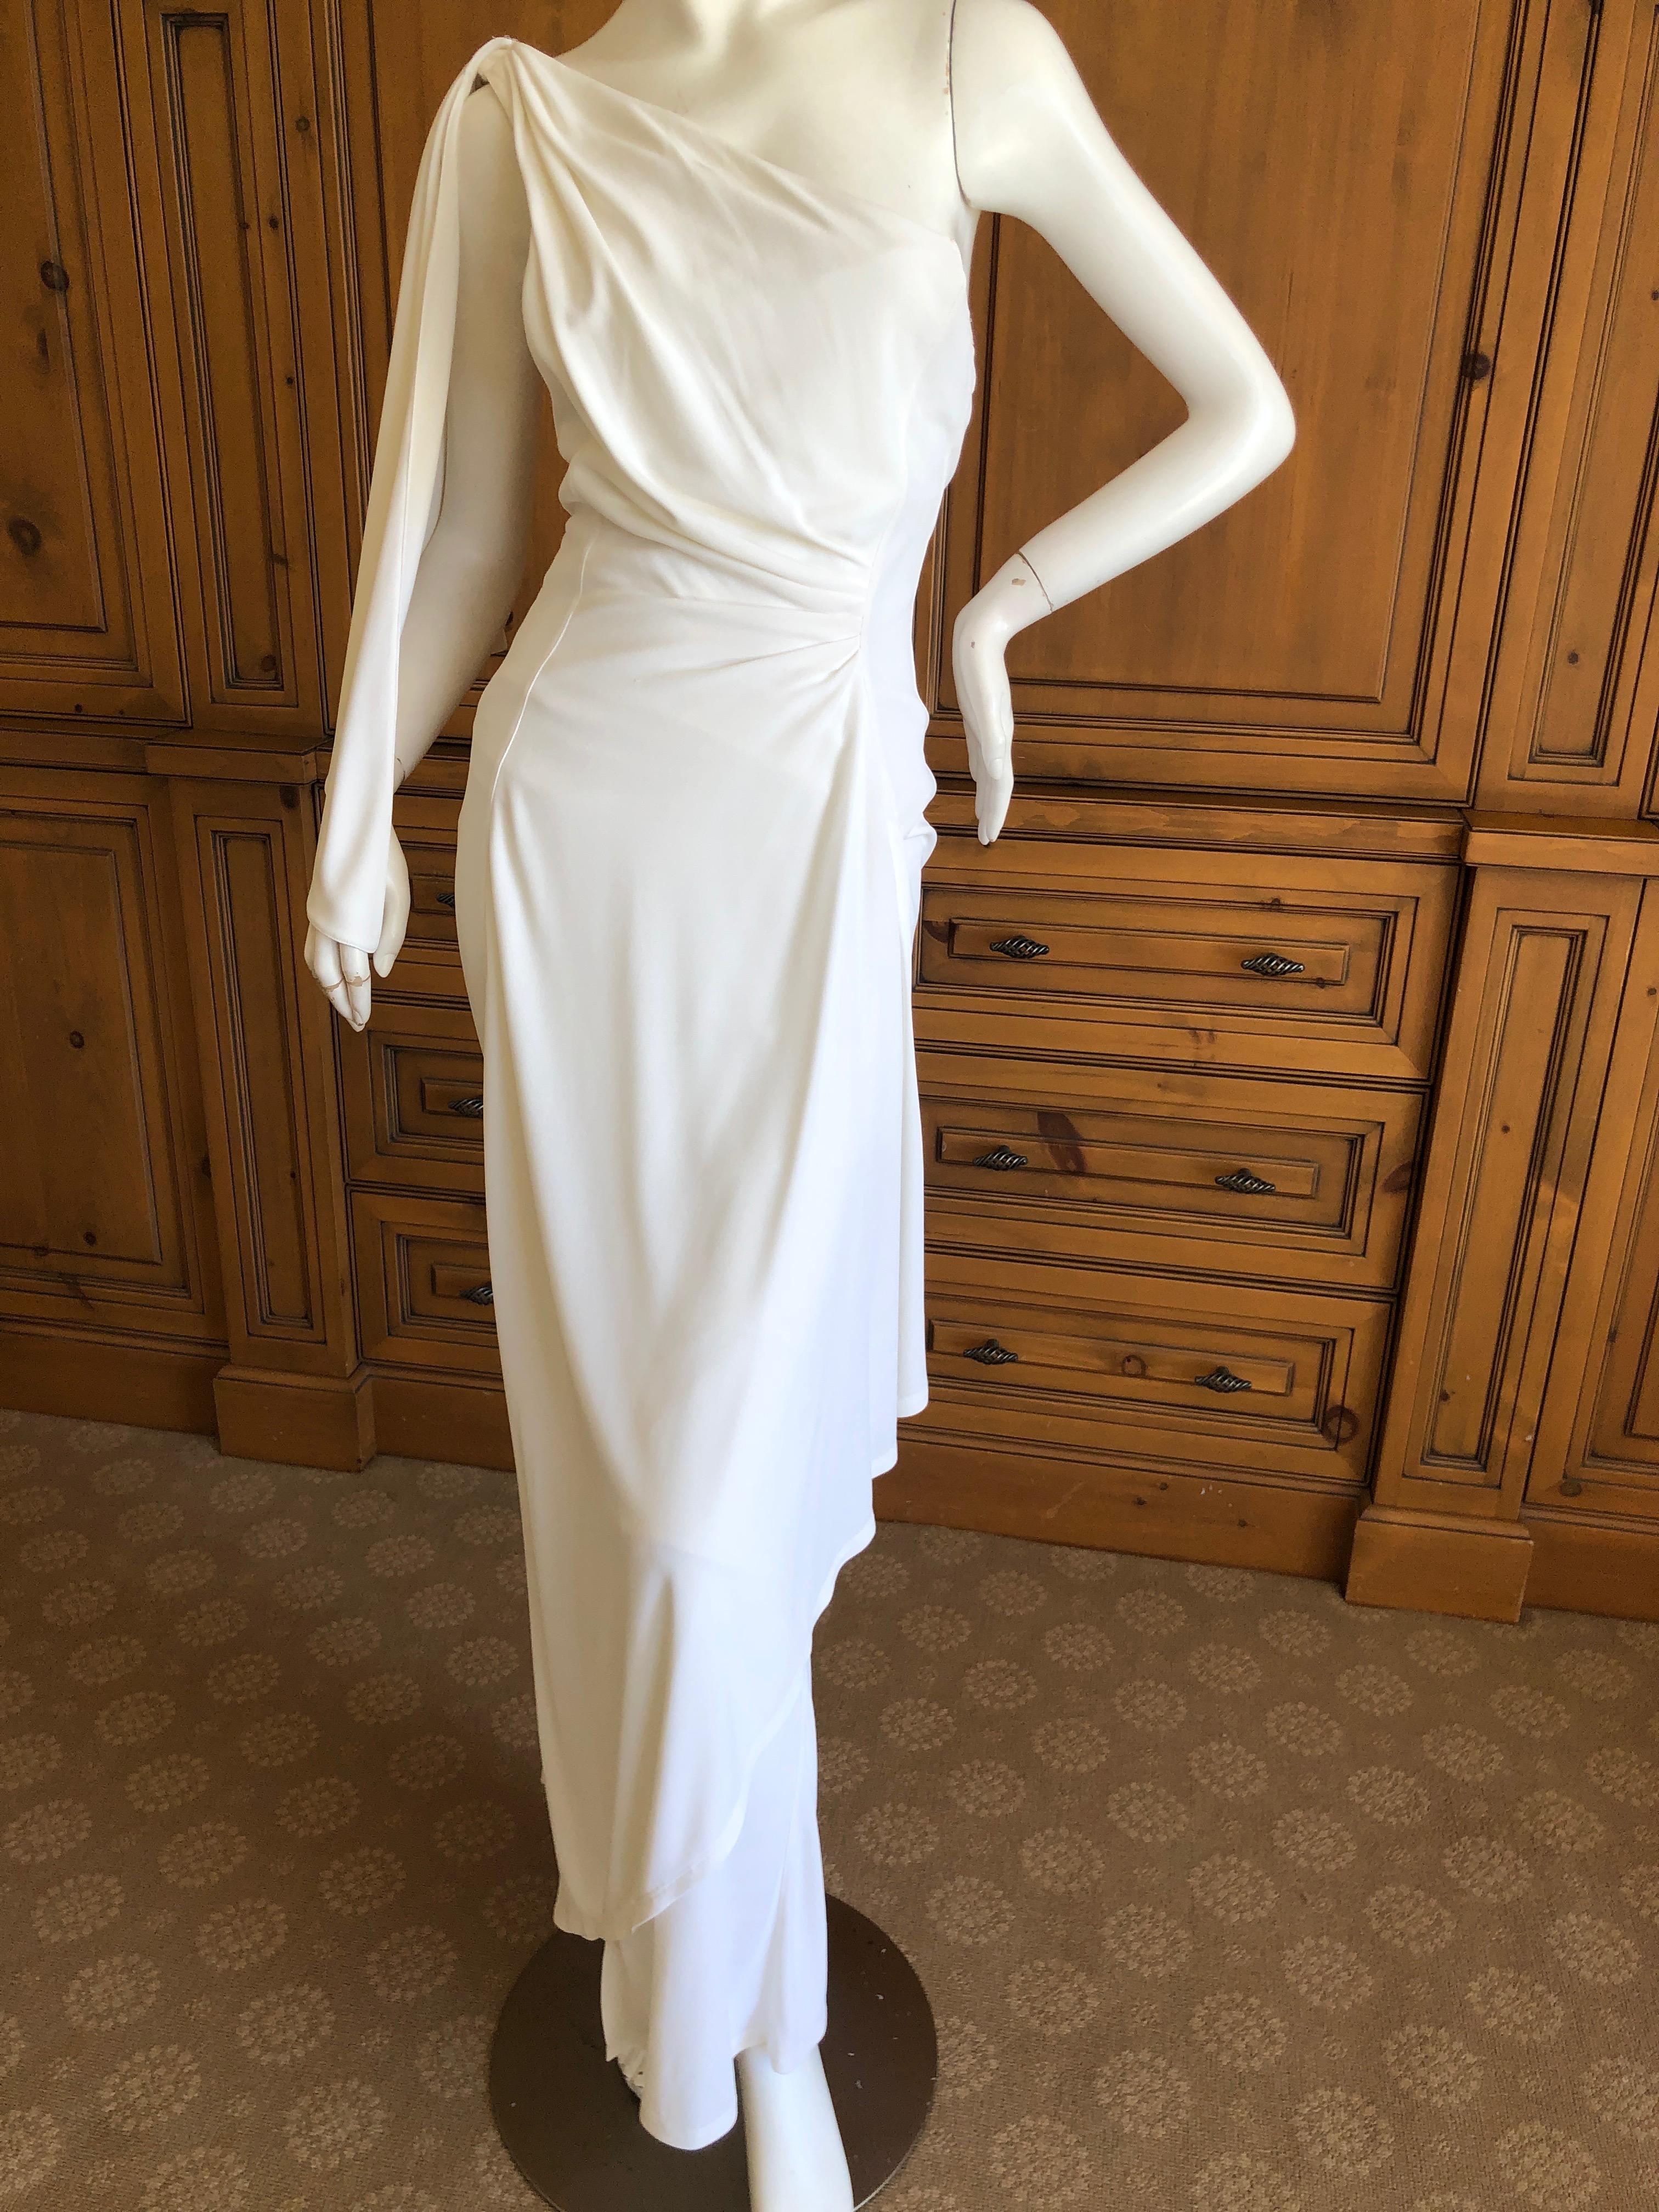 Thierry Mugler Paris Vintage Eighties Ivory White One Shoulder Goddess Dress.
So beautiful.
Size 38
Bust 36